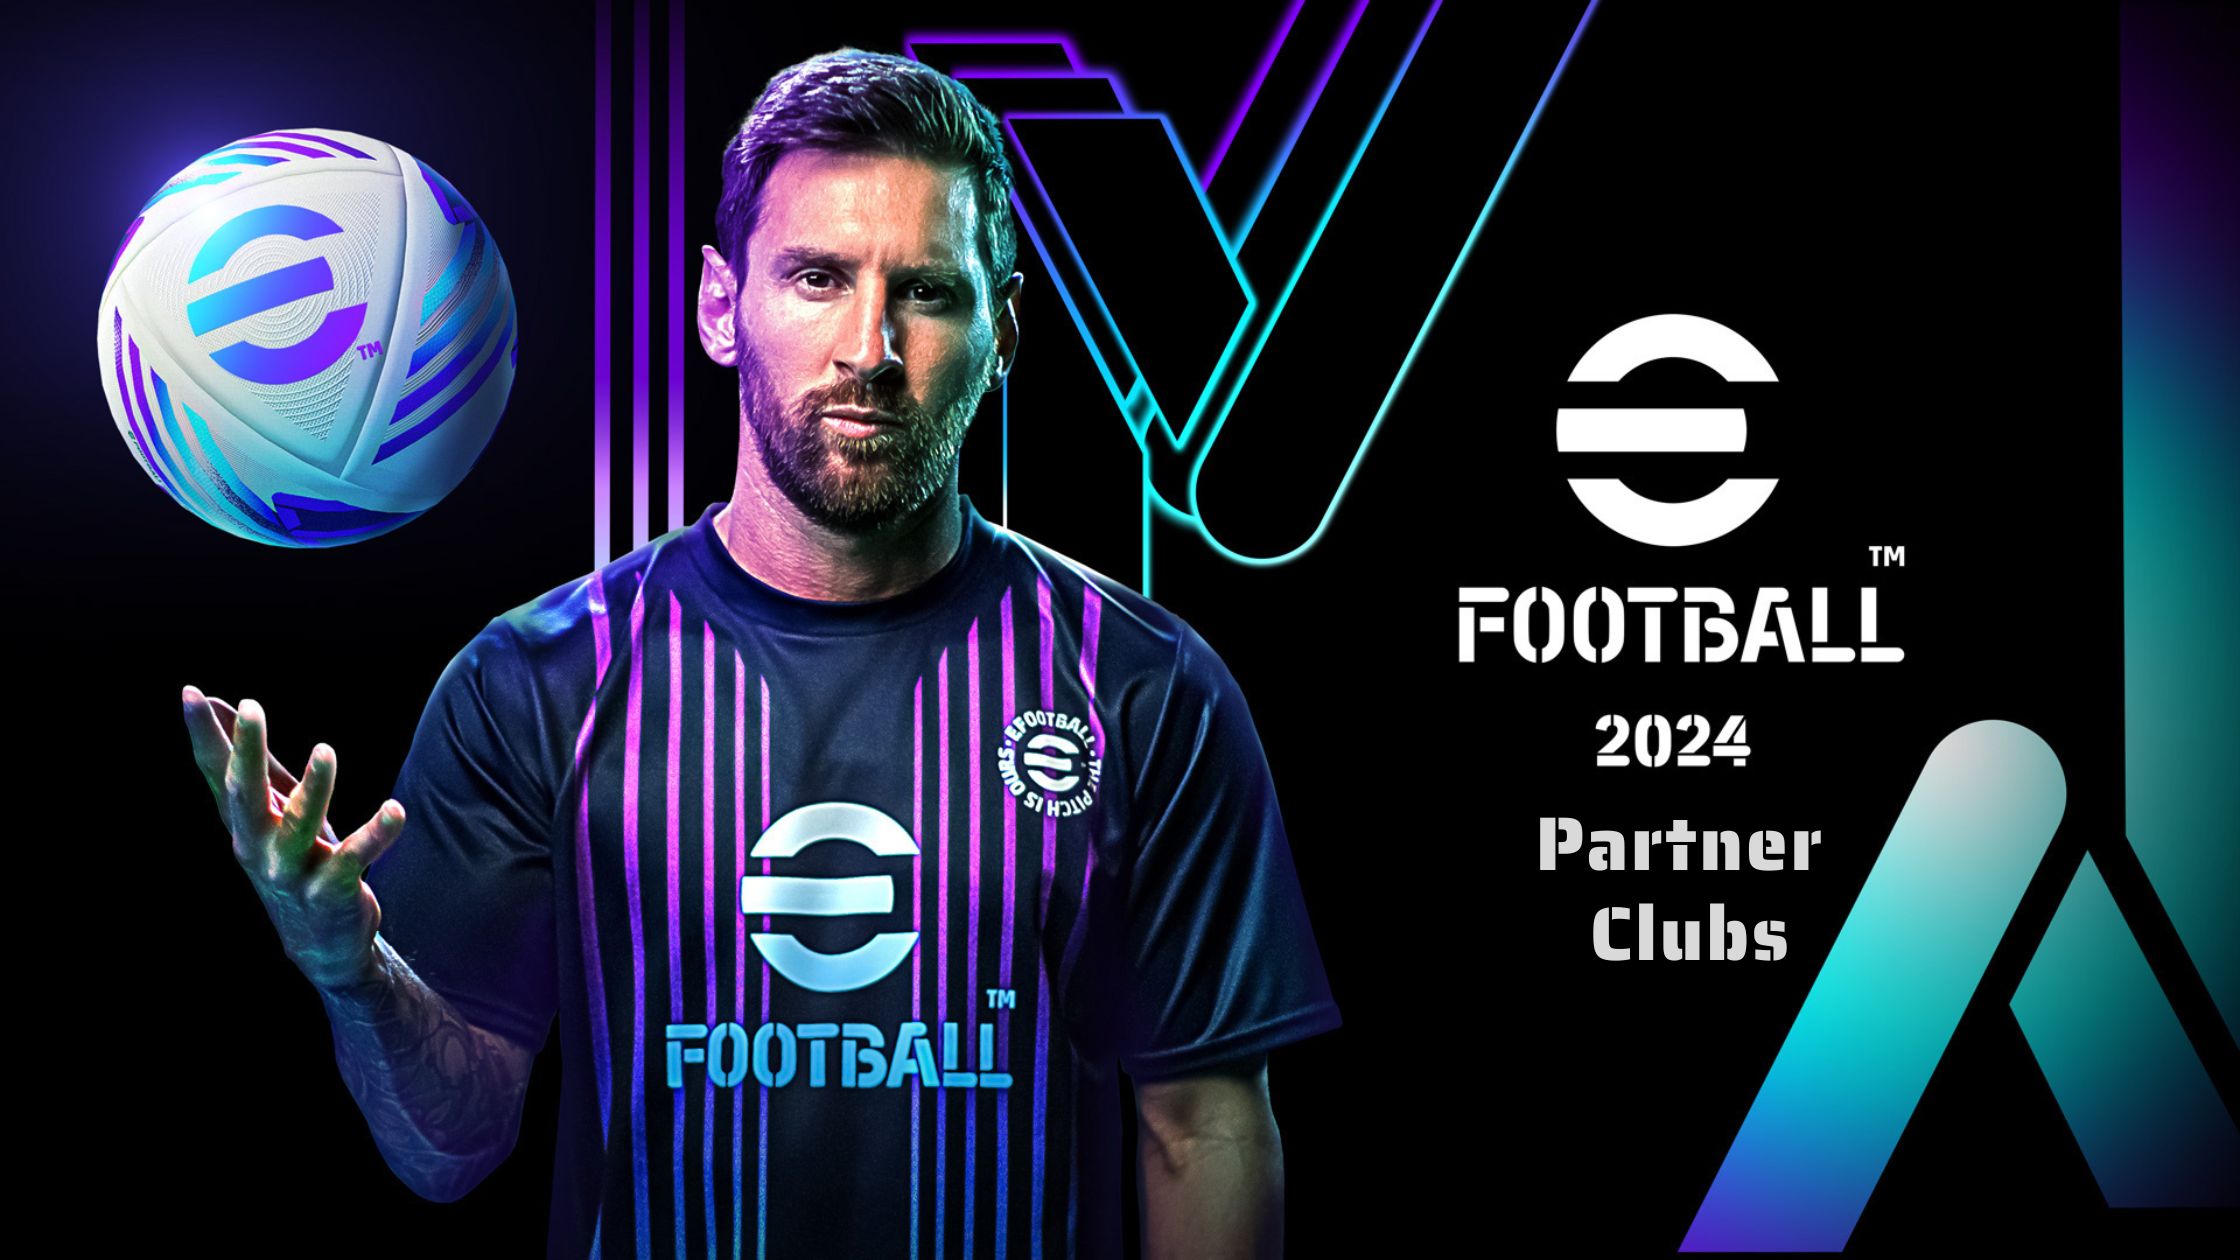 All official partner football clubs in eFootball 2024